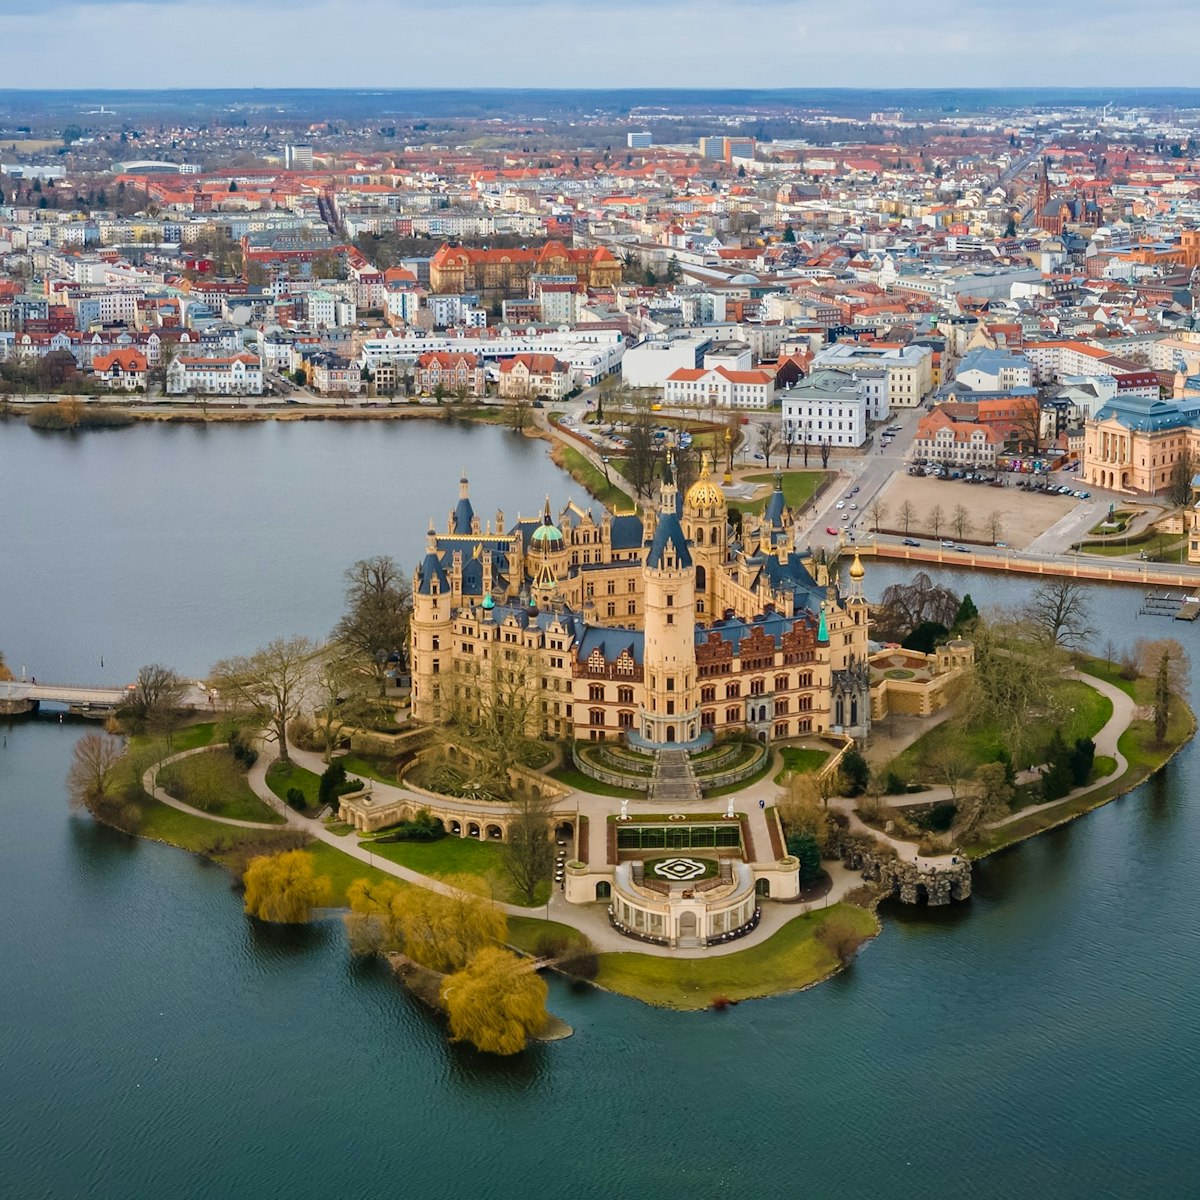 The lake kingdom in the north-east of Germany. That's what we could call our neighbour's least populated country, which invites you to explore on a houseboat. Within pleasant driving distance, it offers idyllic cruising routes popular with water sports enthusiasts or fishermen.